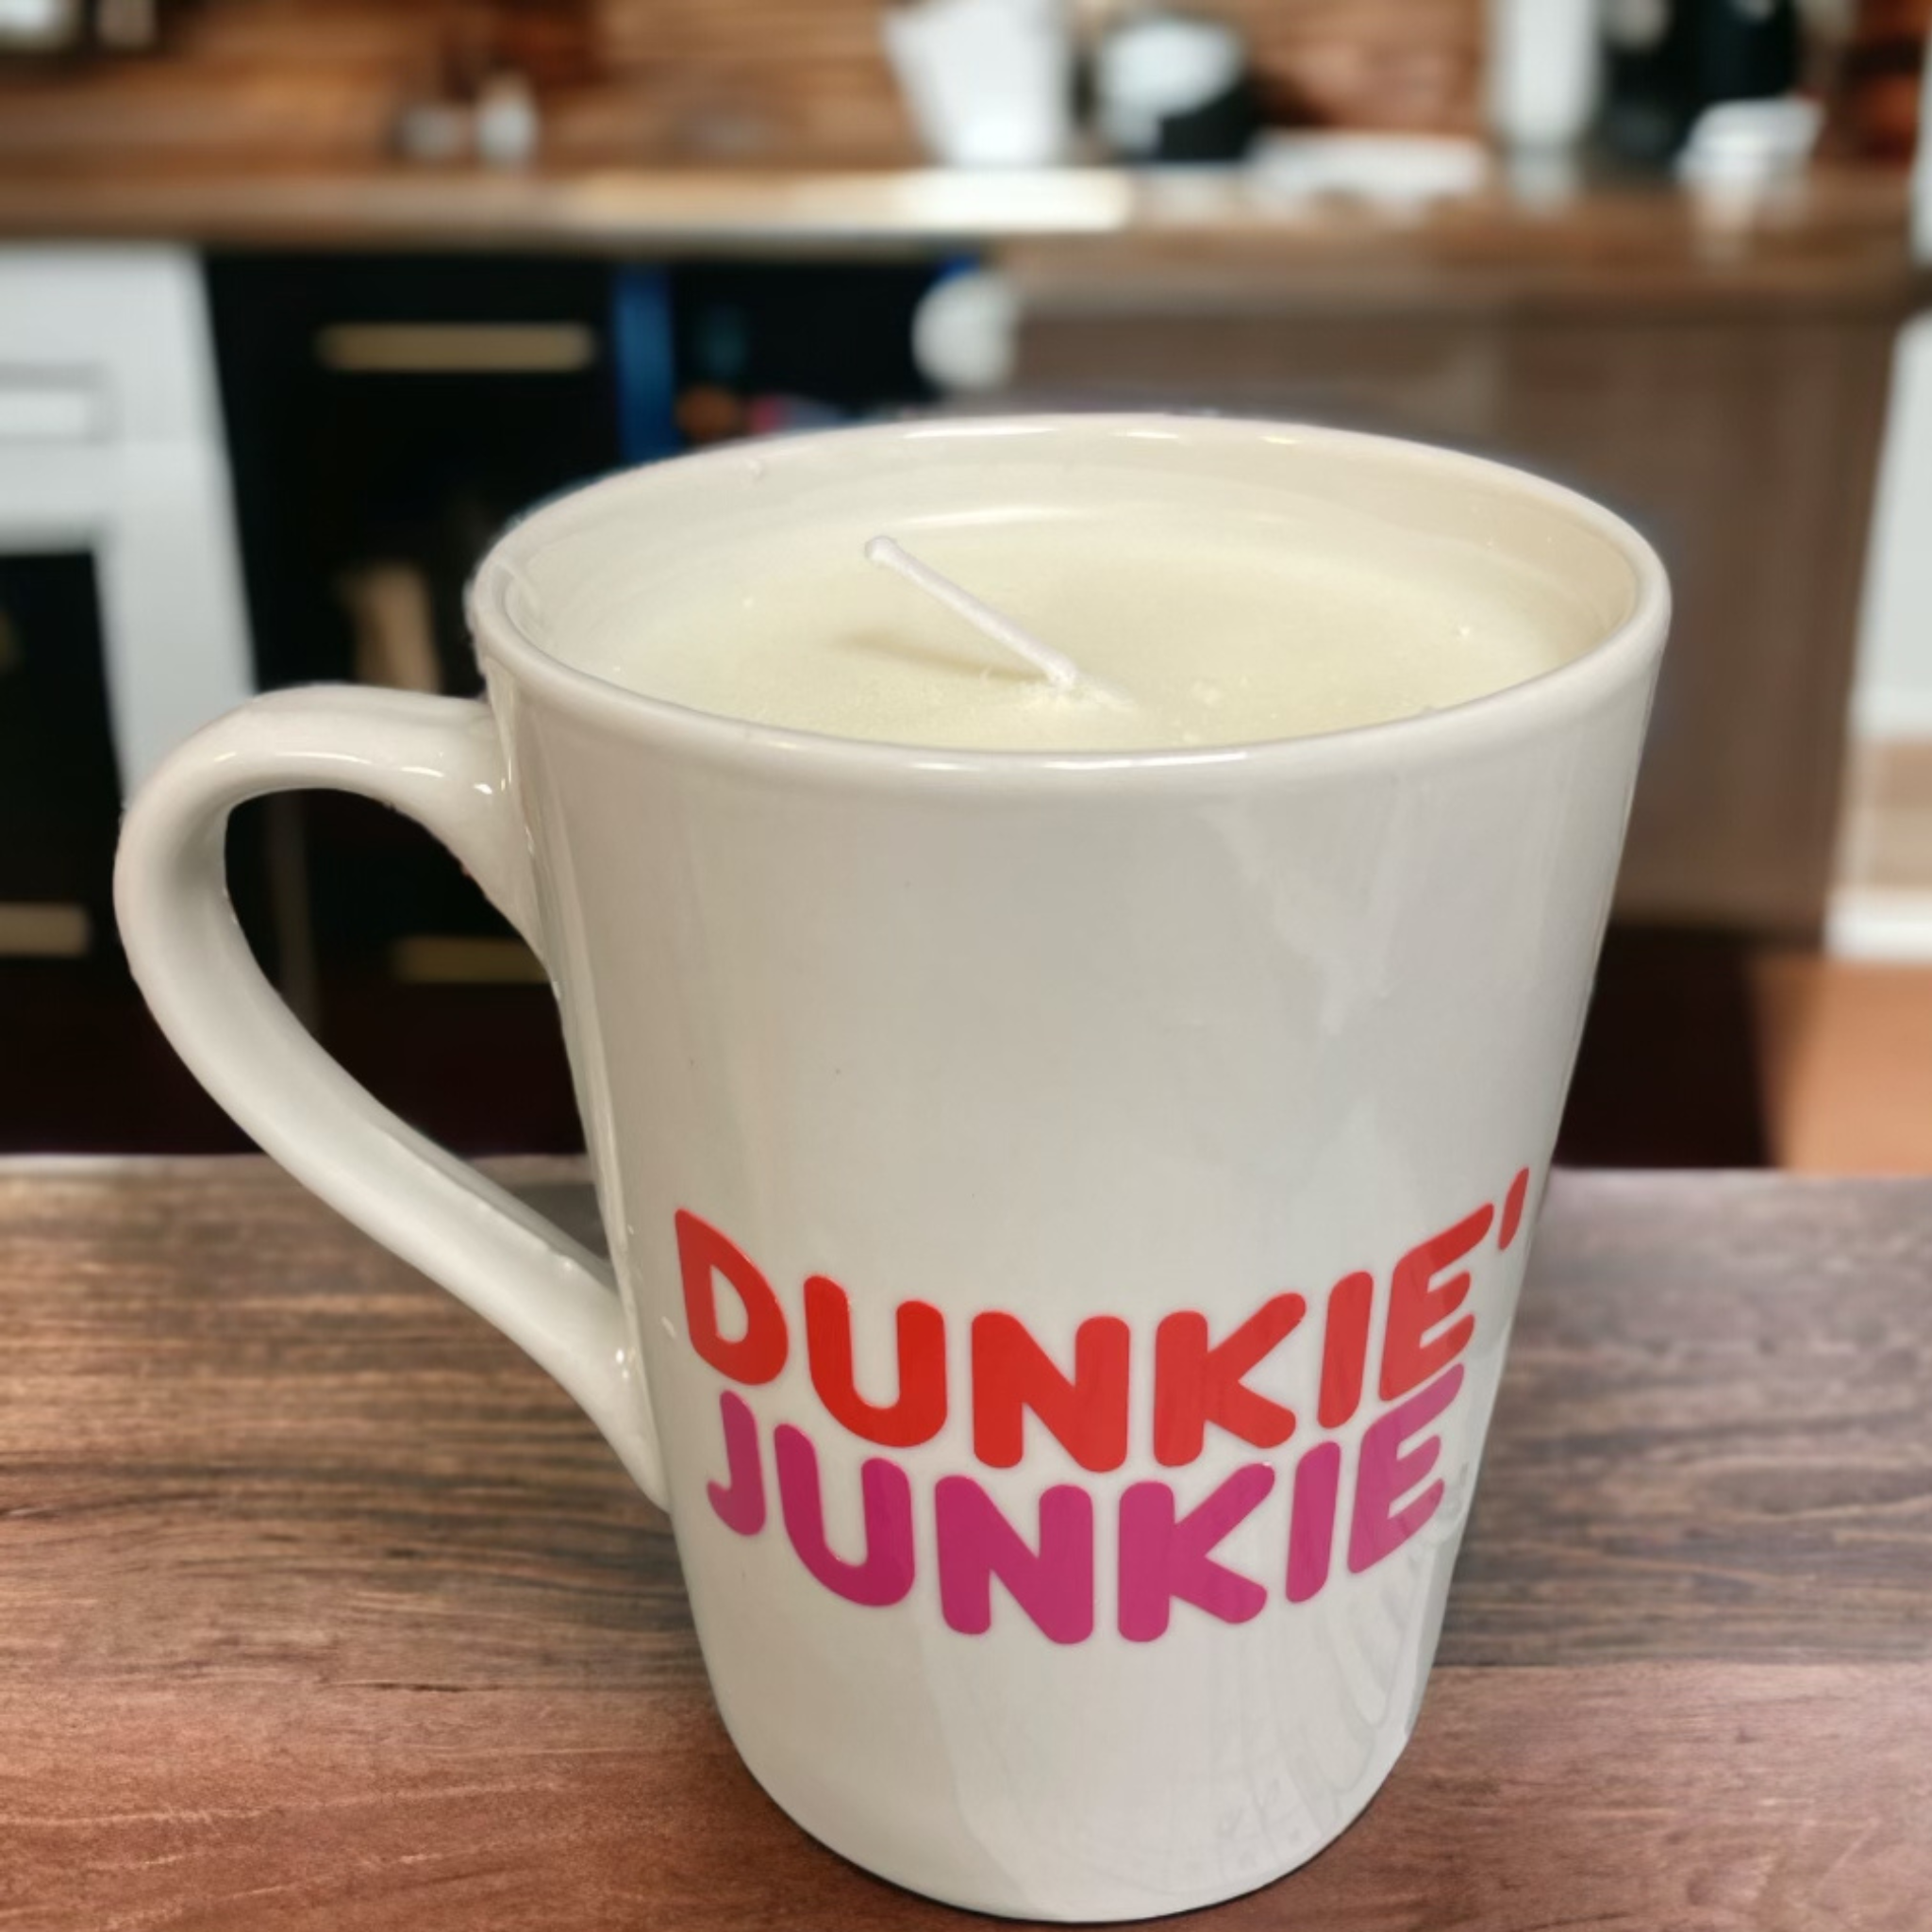 Dunkie Junkie Candle - Coffee Scent